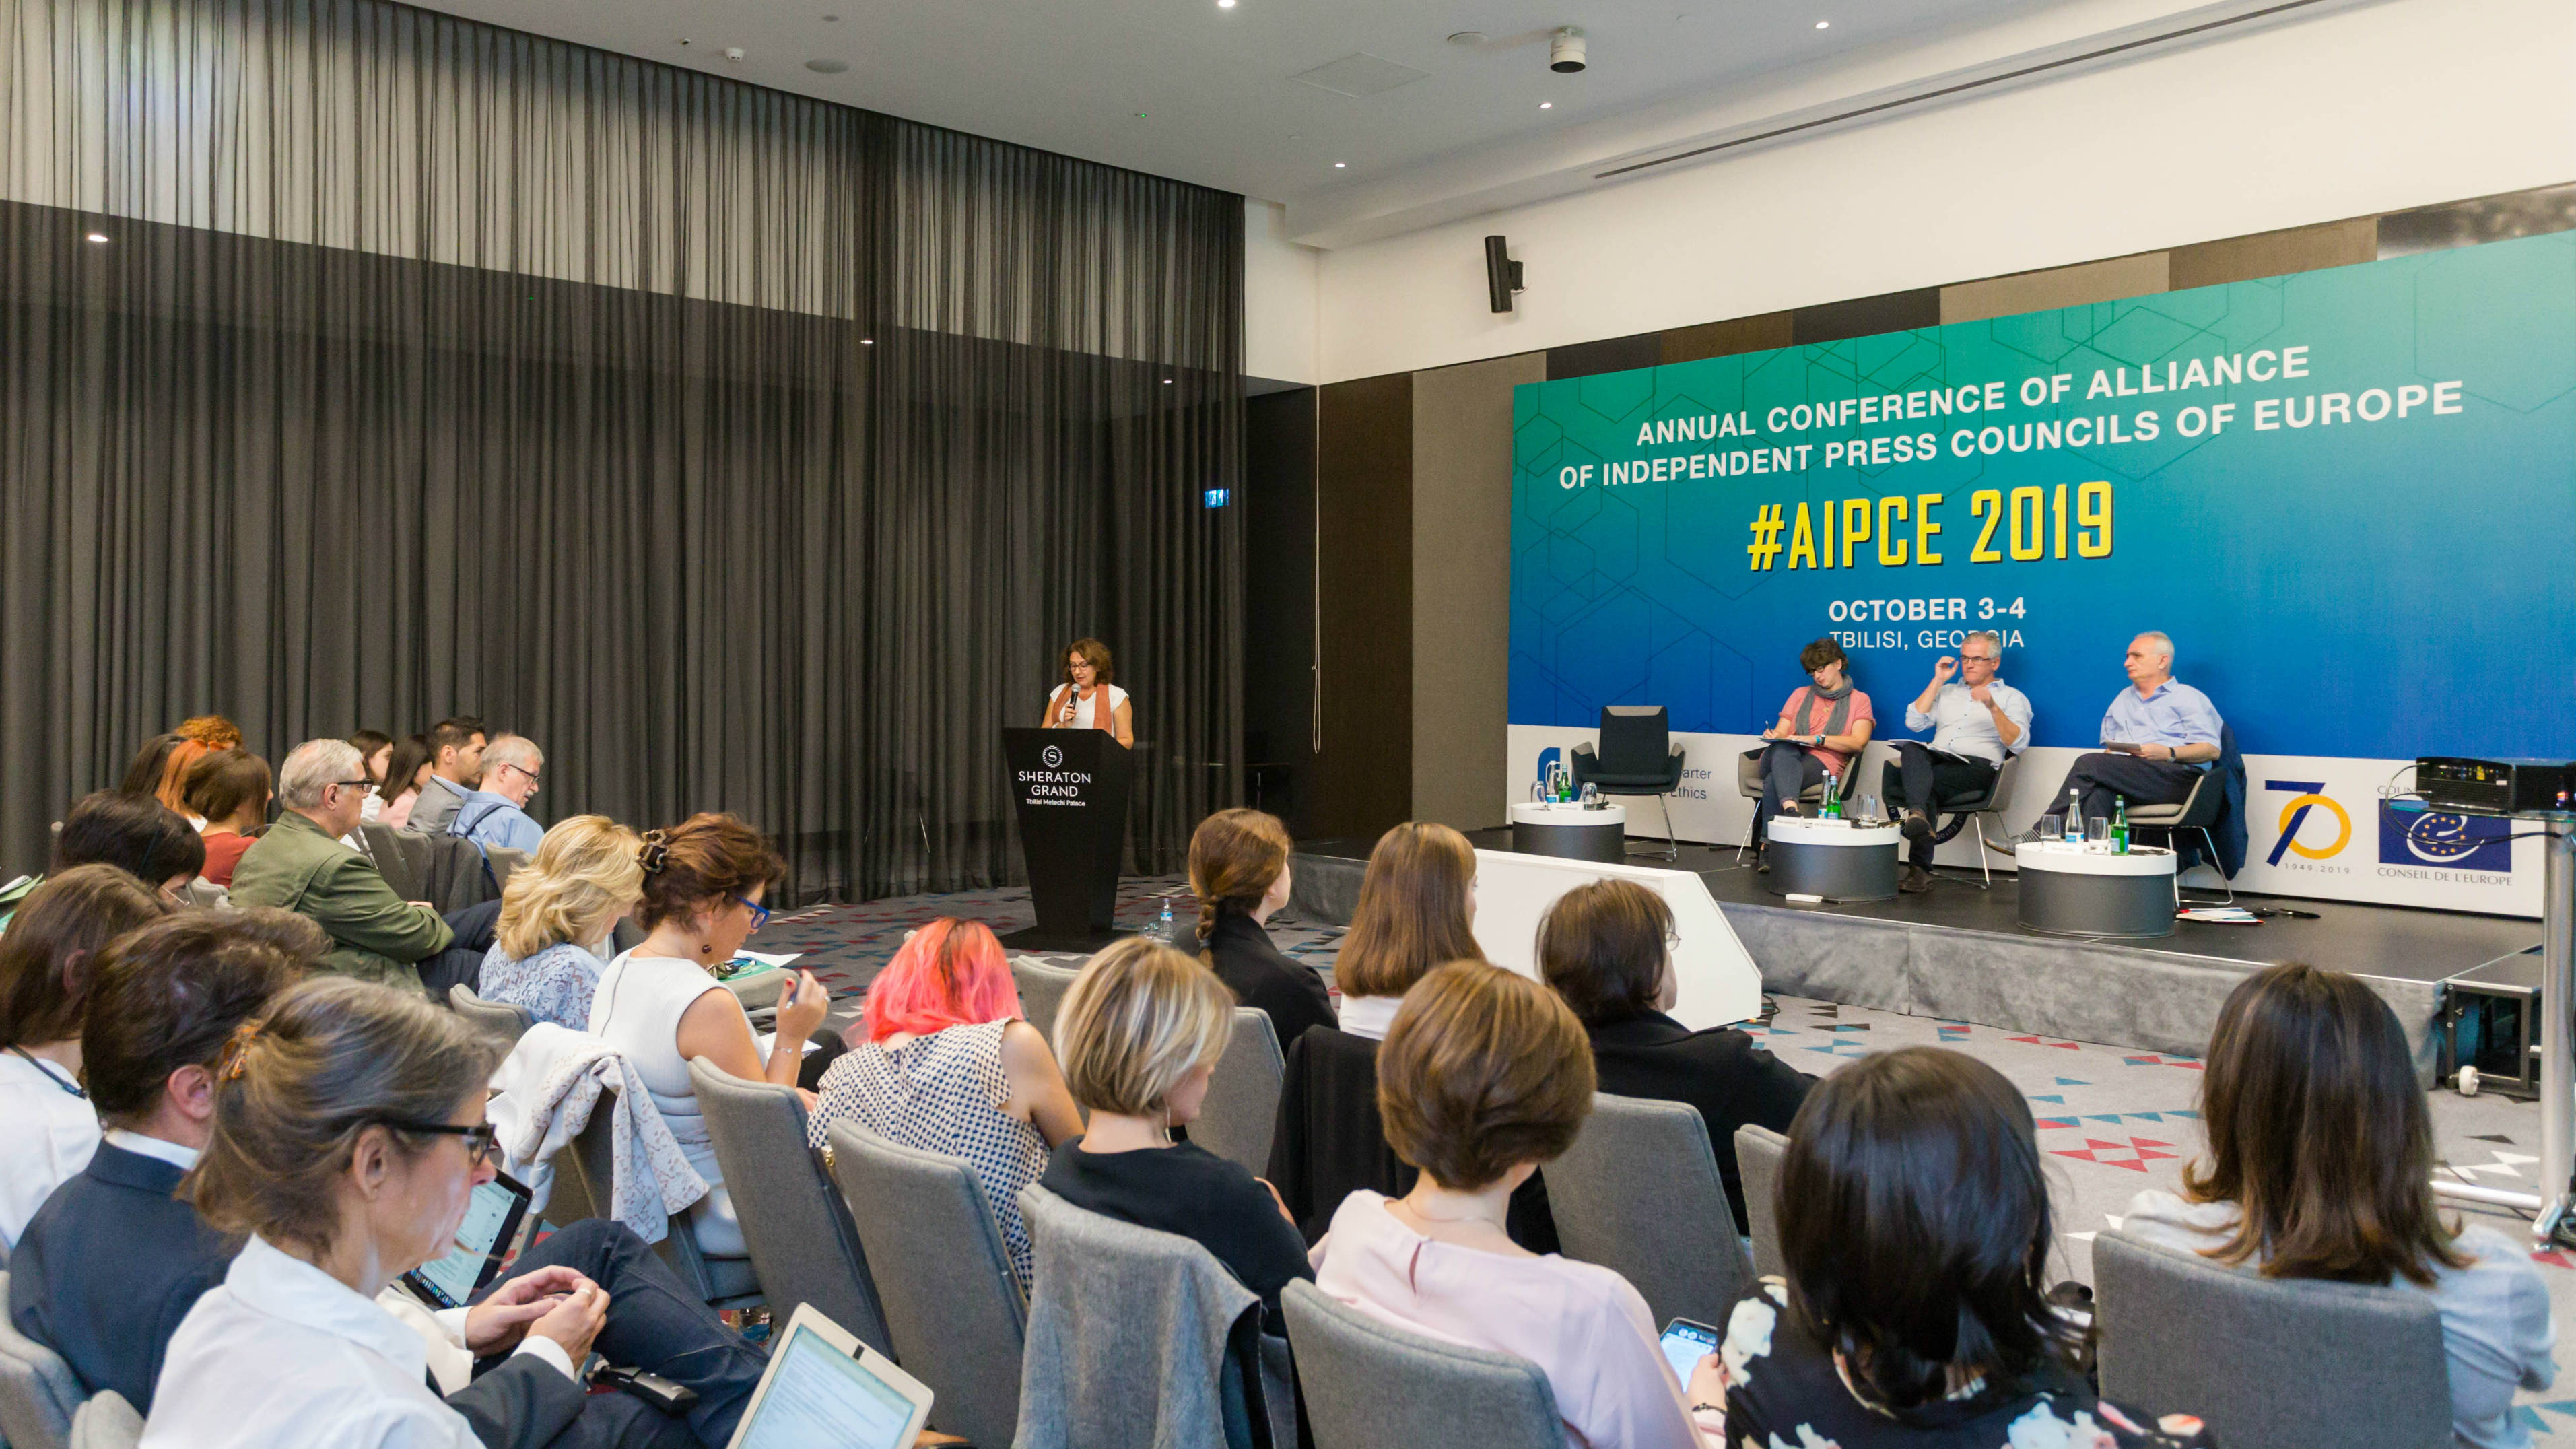 Annual Conference of the Alliance of Independent Press Councils of Europe held in Georgia